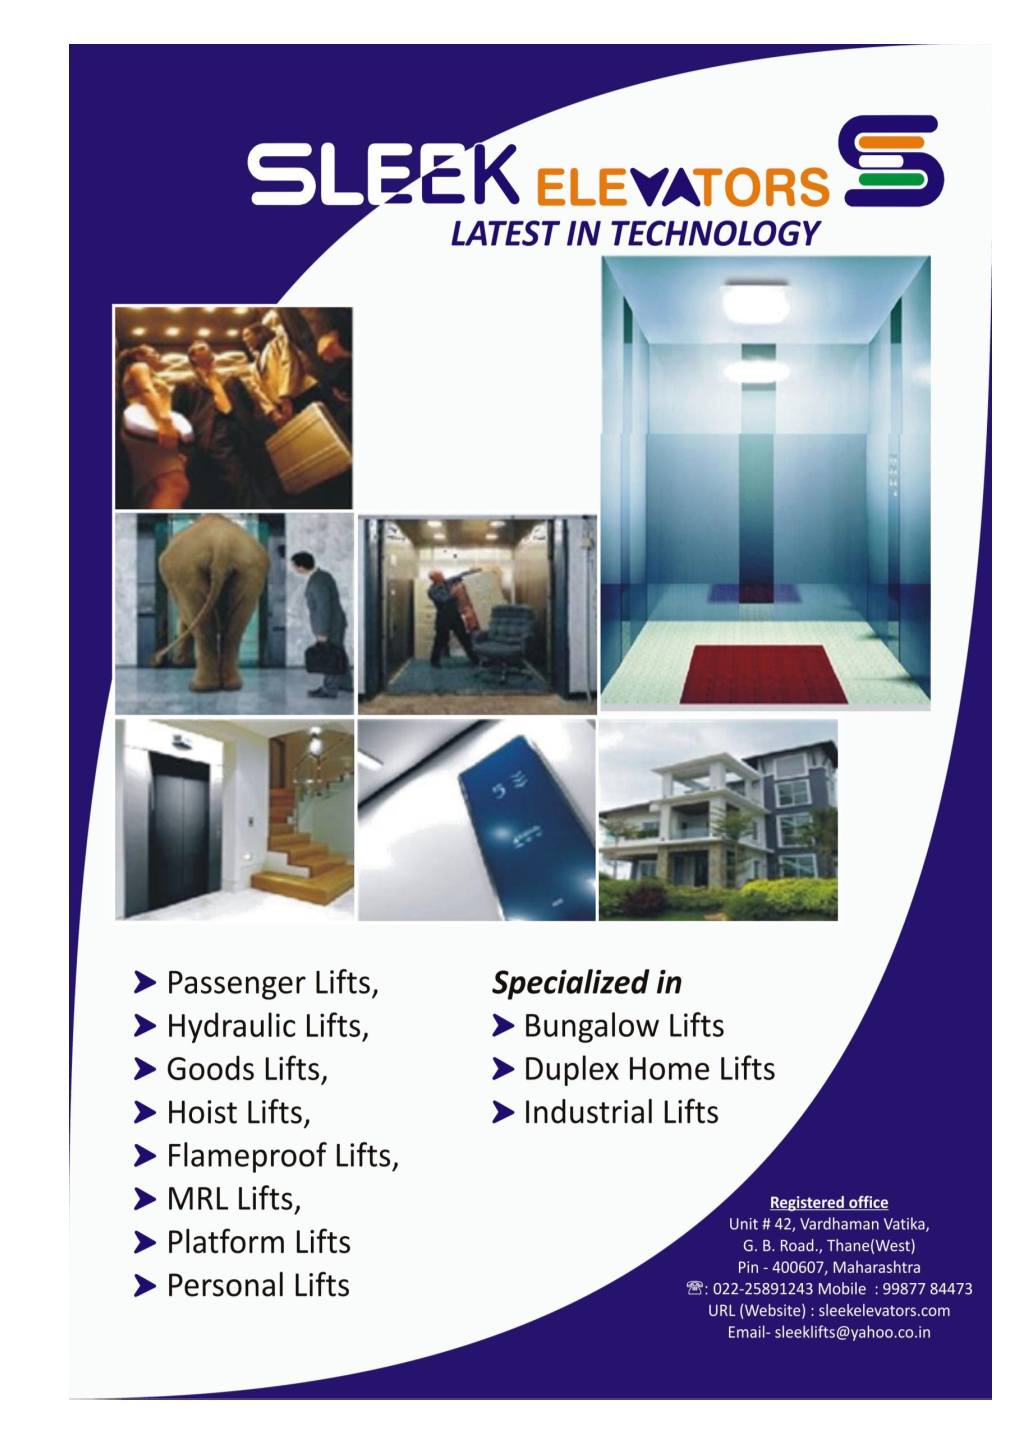 SLEEK Elevators Is Government Approved Company for Installation of Passenger Lifts